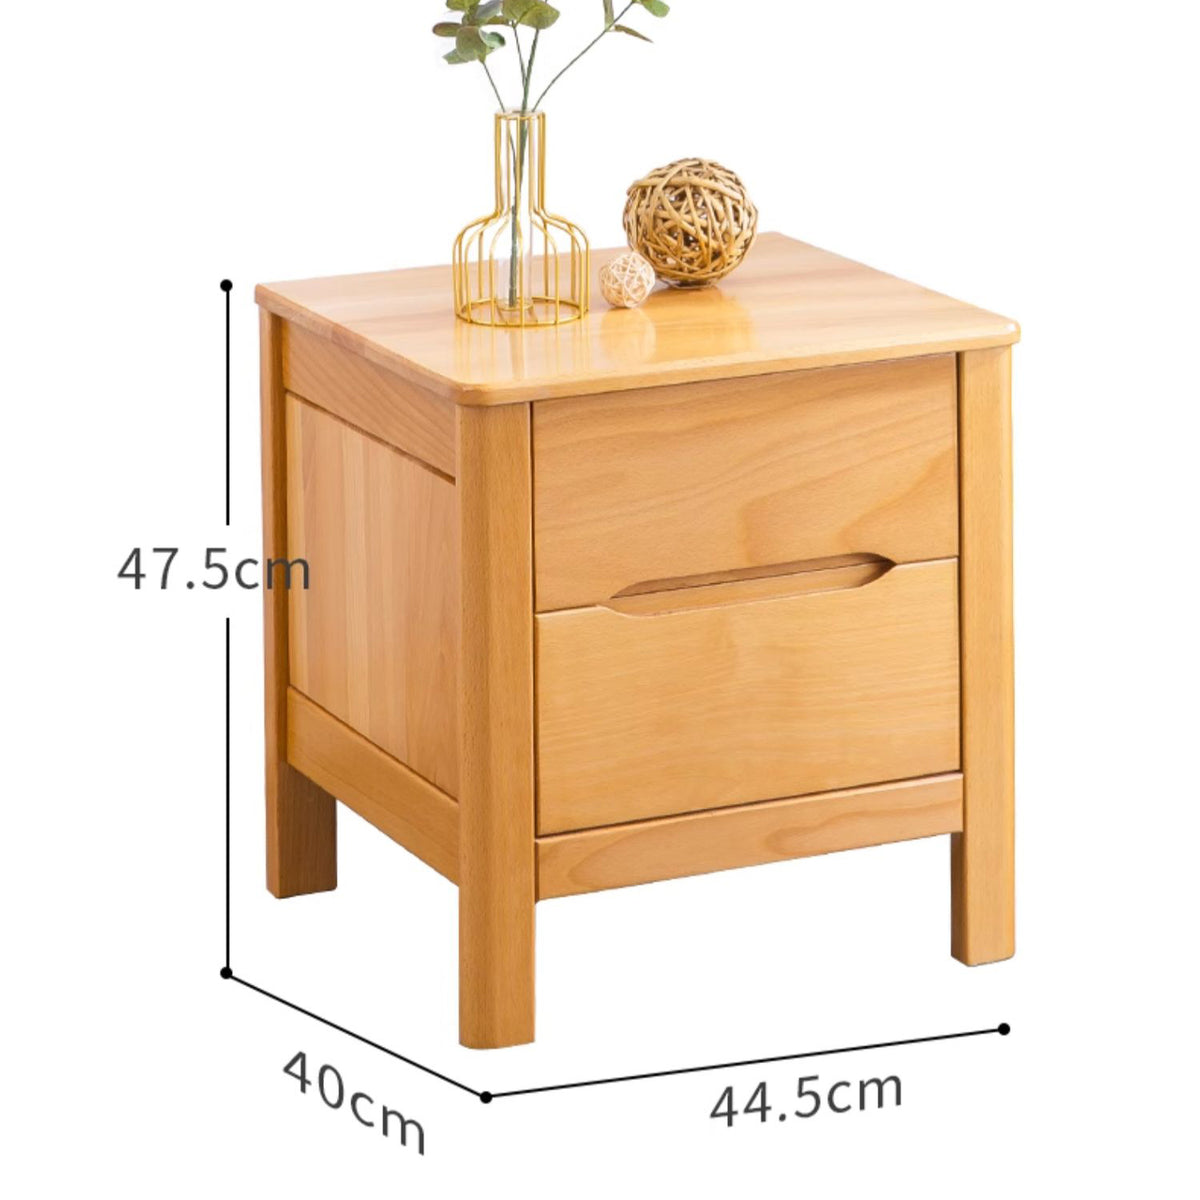 Charming Natural Brown & White Beech Wood Bedside Cupboard – Stylish Bedroom Storage Solution fslmz-1101